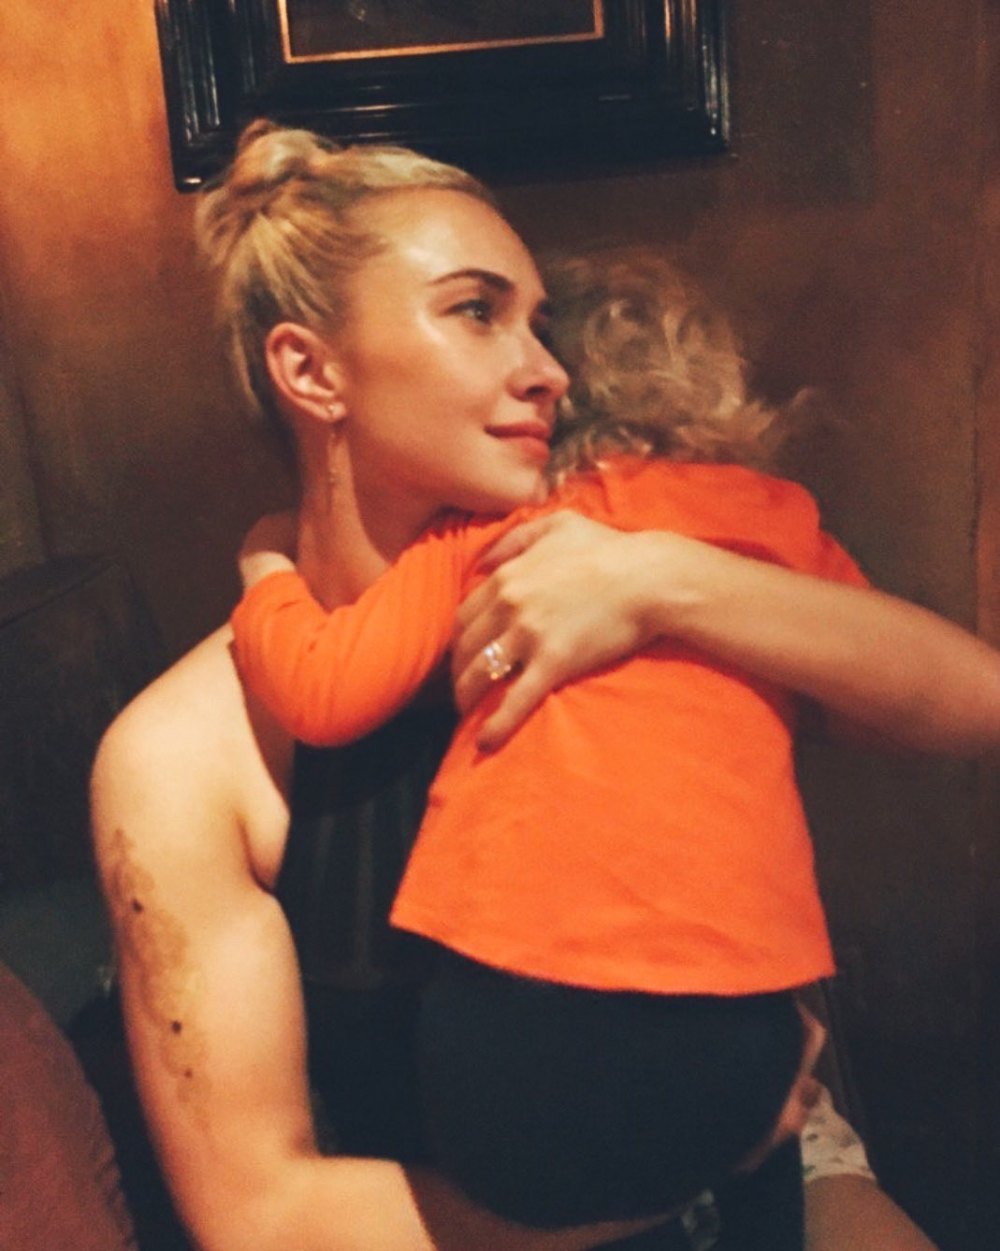 Hayden Panettiere Posts Throwback Photo for Daughter Kayas 5th Birthday